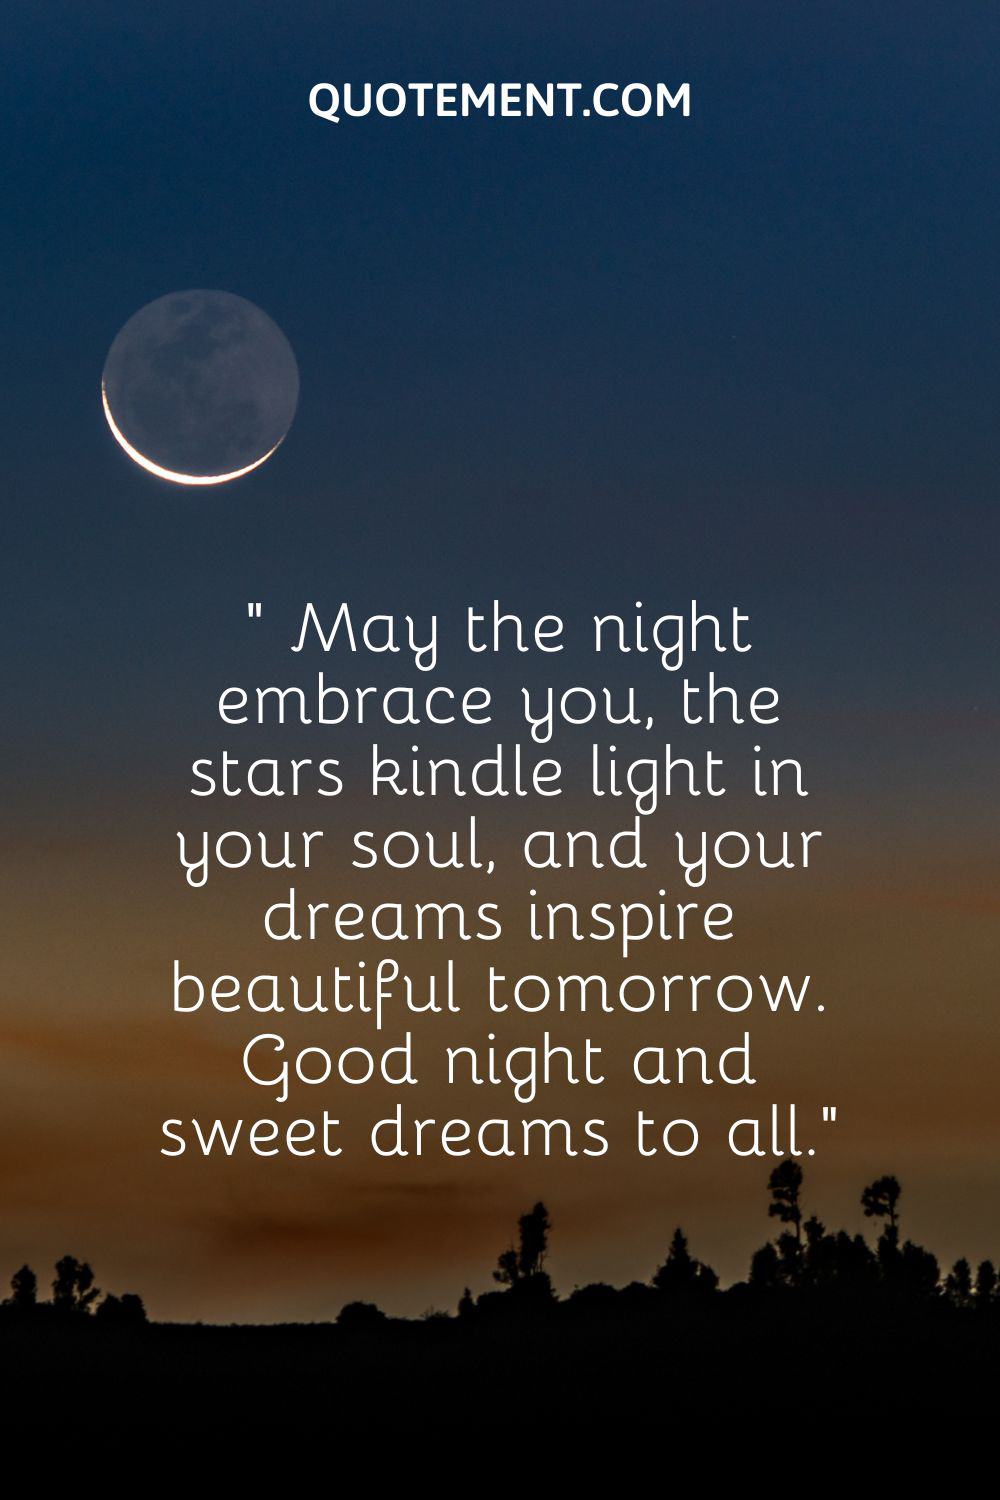 May the night embrace you